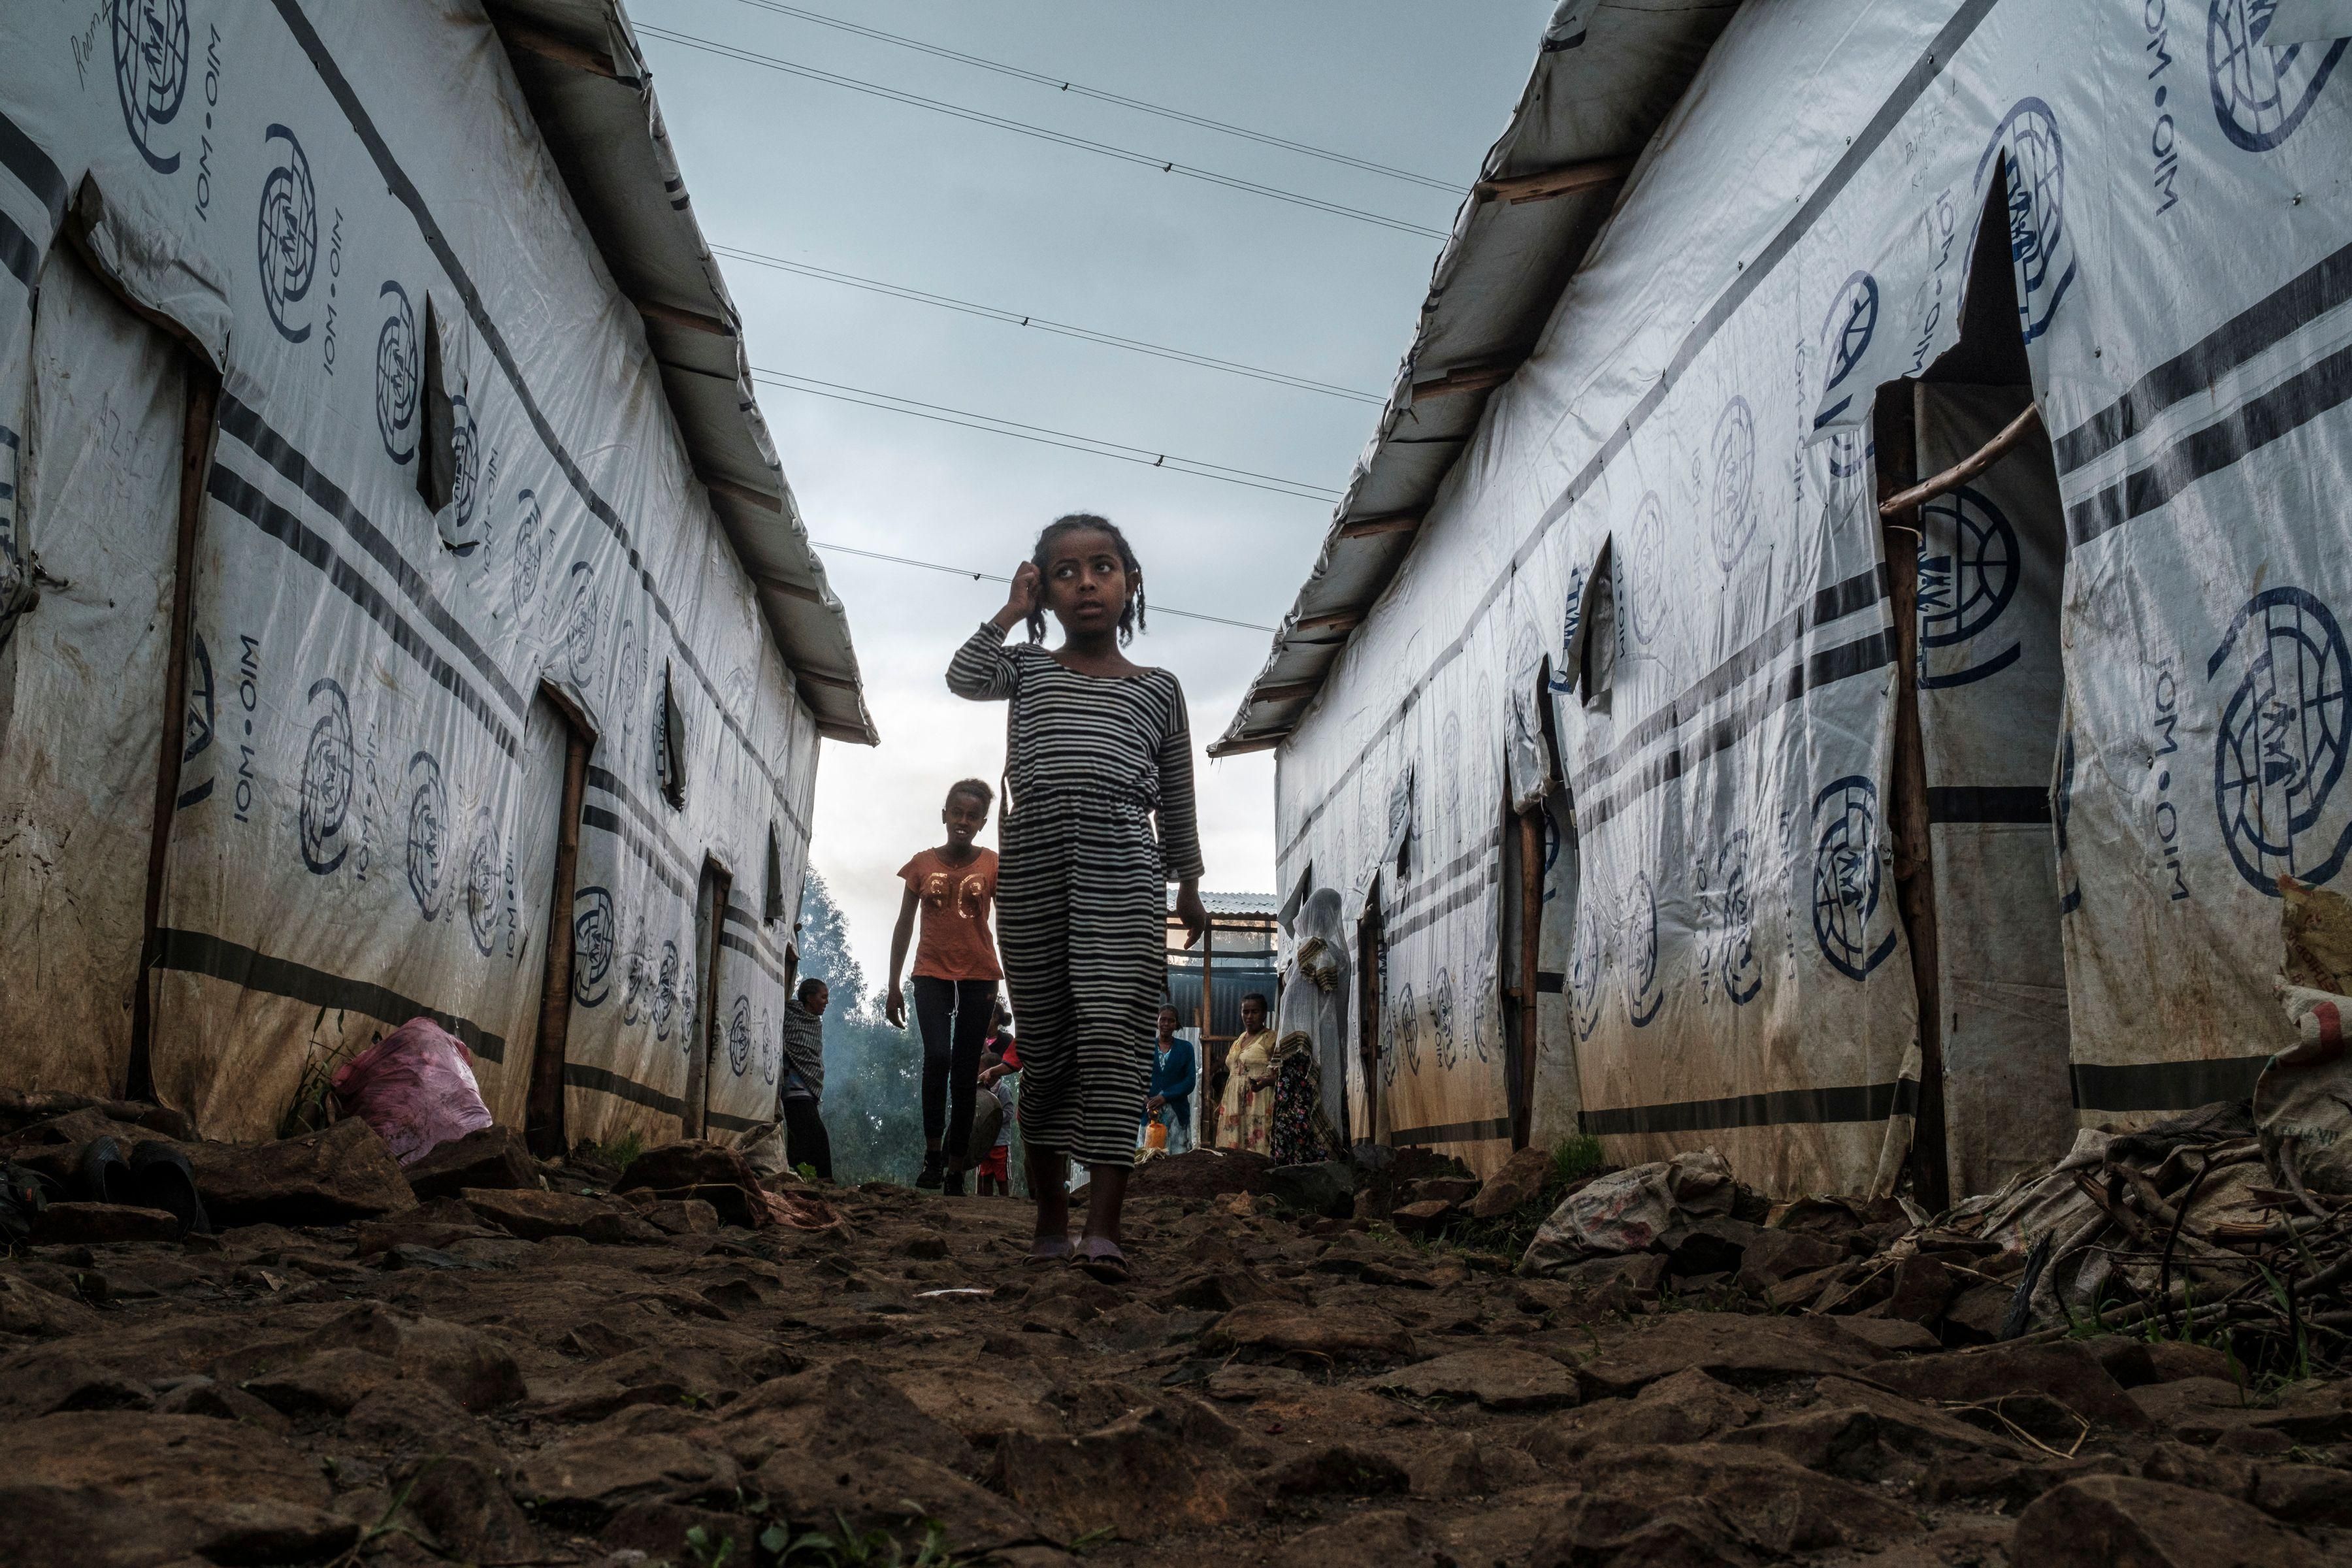  Internally displaced children run in an alley of a camp in the town of Azezo, Ethiopia